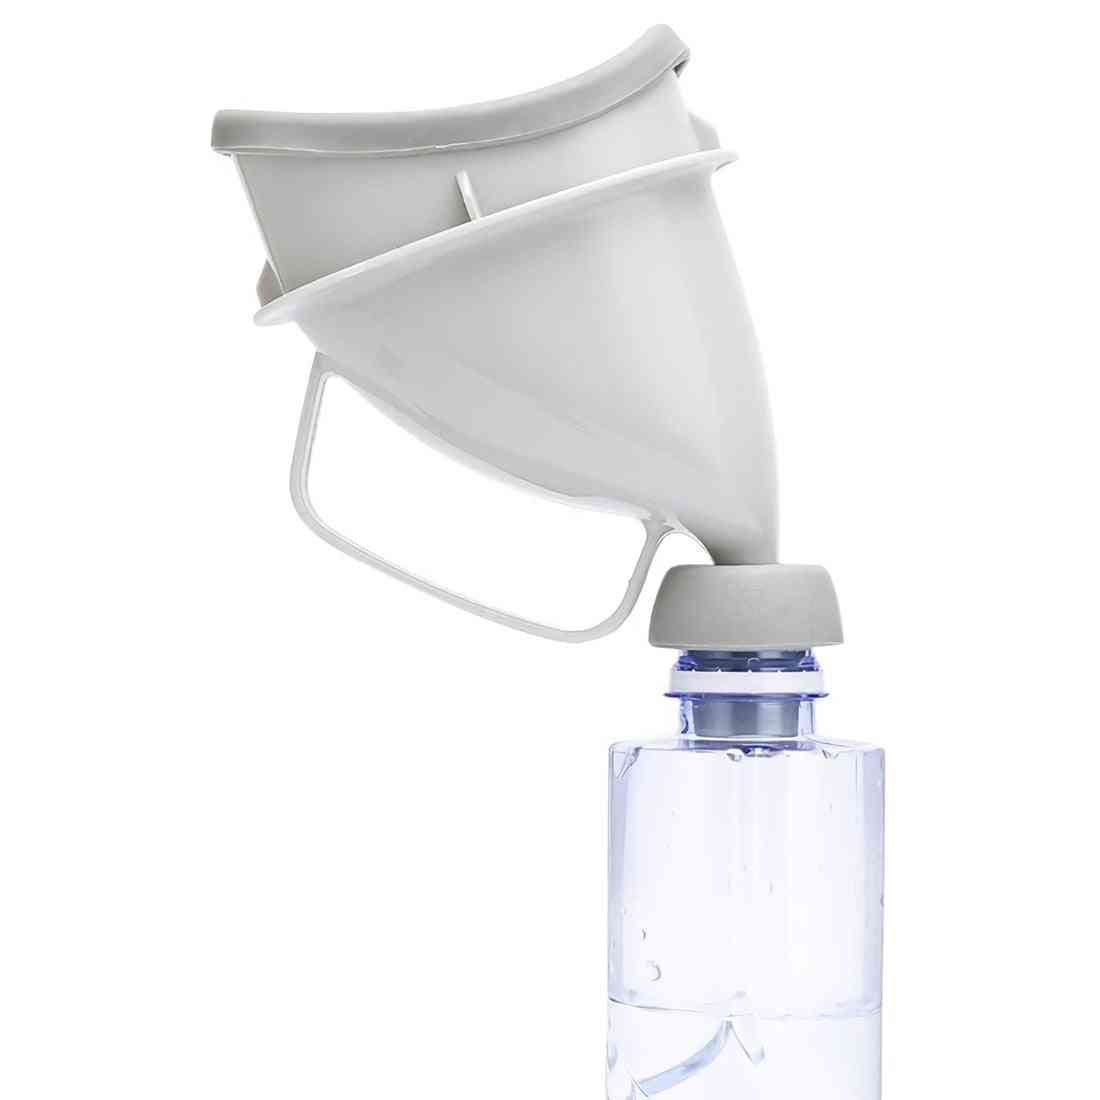 Portable Reusable Female Urinal Funnel For Travel - Sit Or Stand Emergency